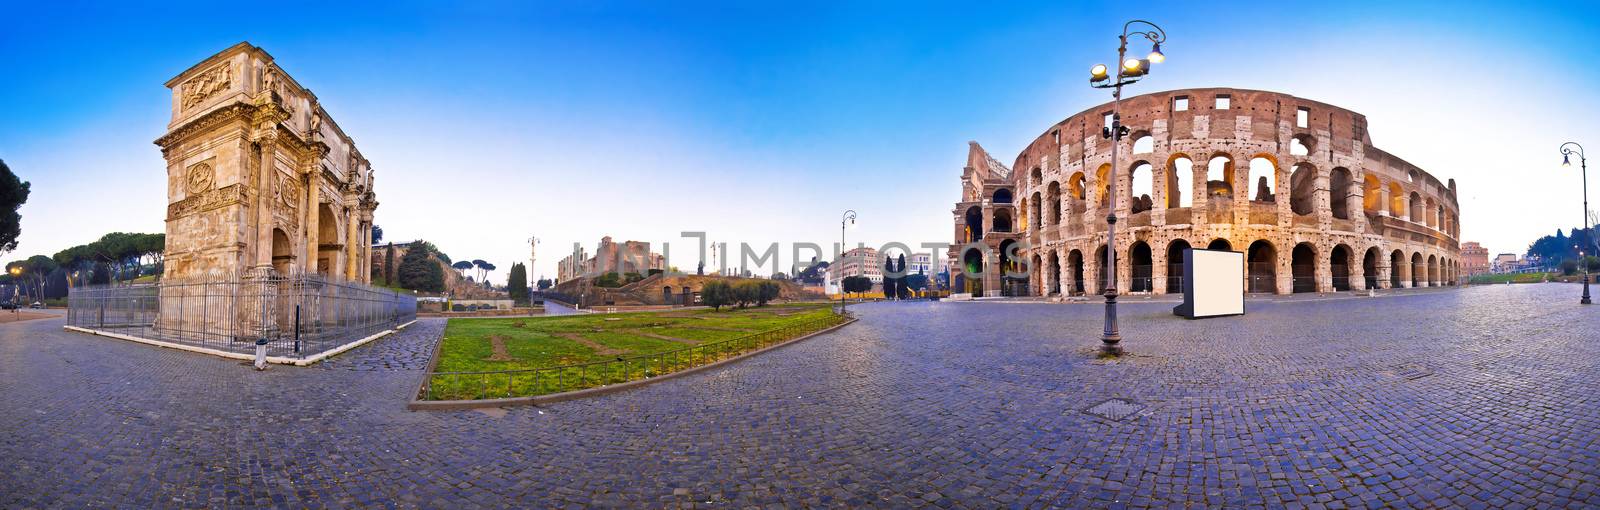 Colosseum and Arch of Constantine square panoramic dawn view in  by xbrchx